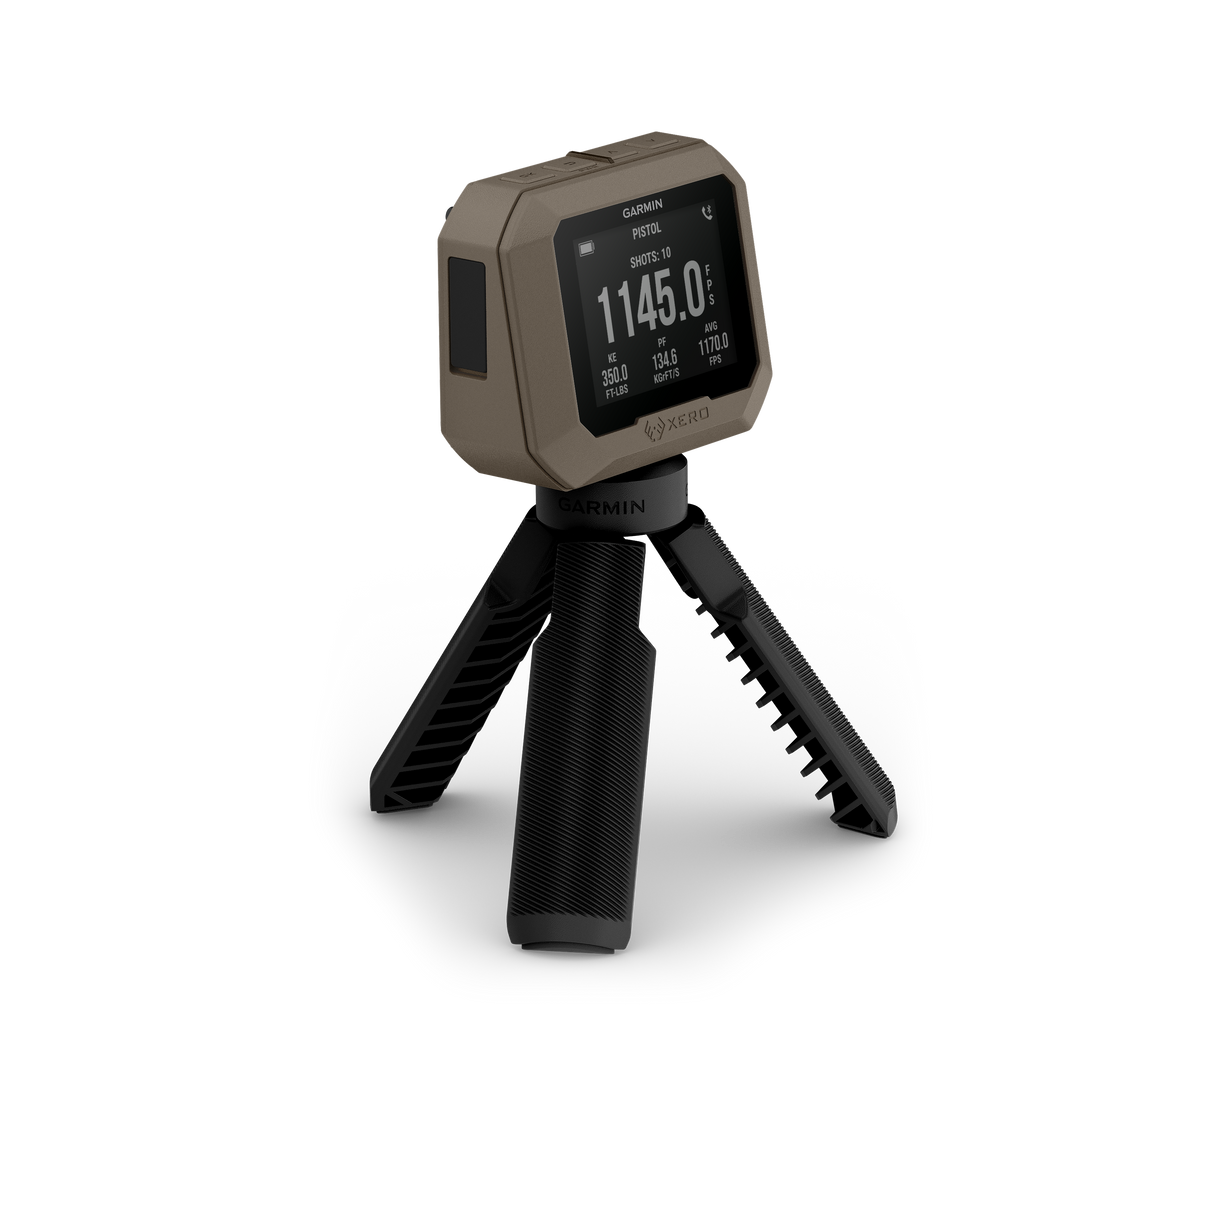 Xero® C1 Pro Chronograph - The Xero® C1 Pro Chronograph, a high-precision chronograph designed for professional shooting and competitive sports, providing accurate measurement of shot velocities and other critical data.